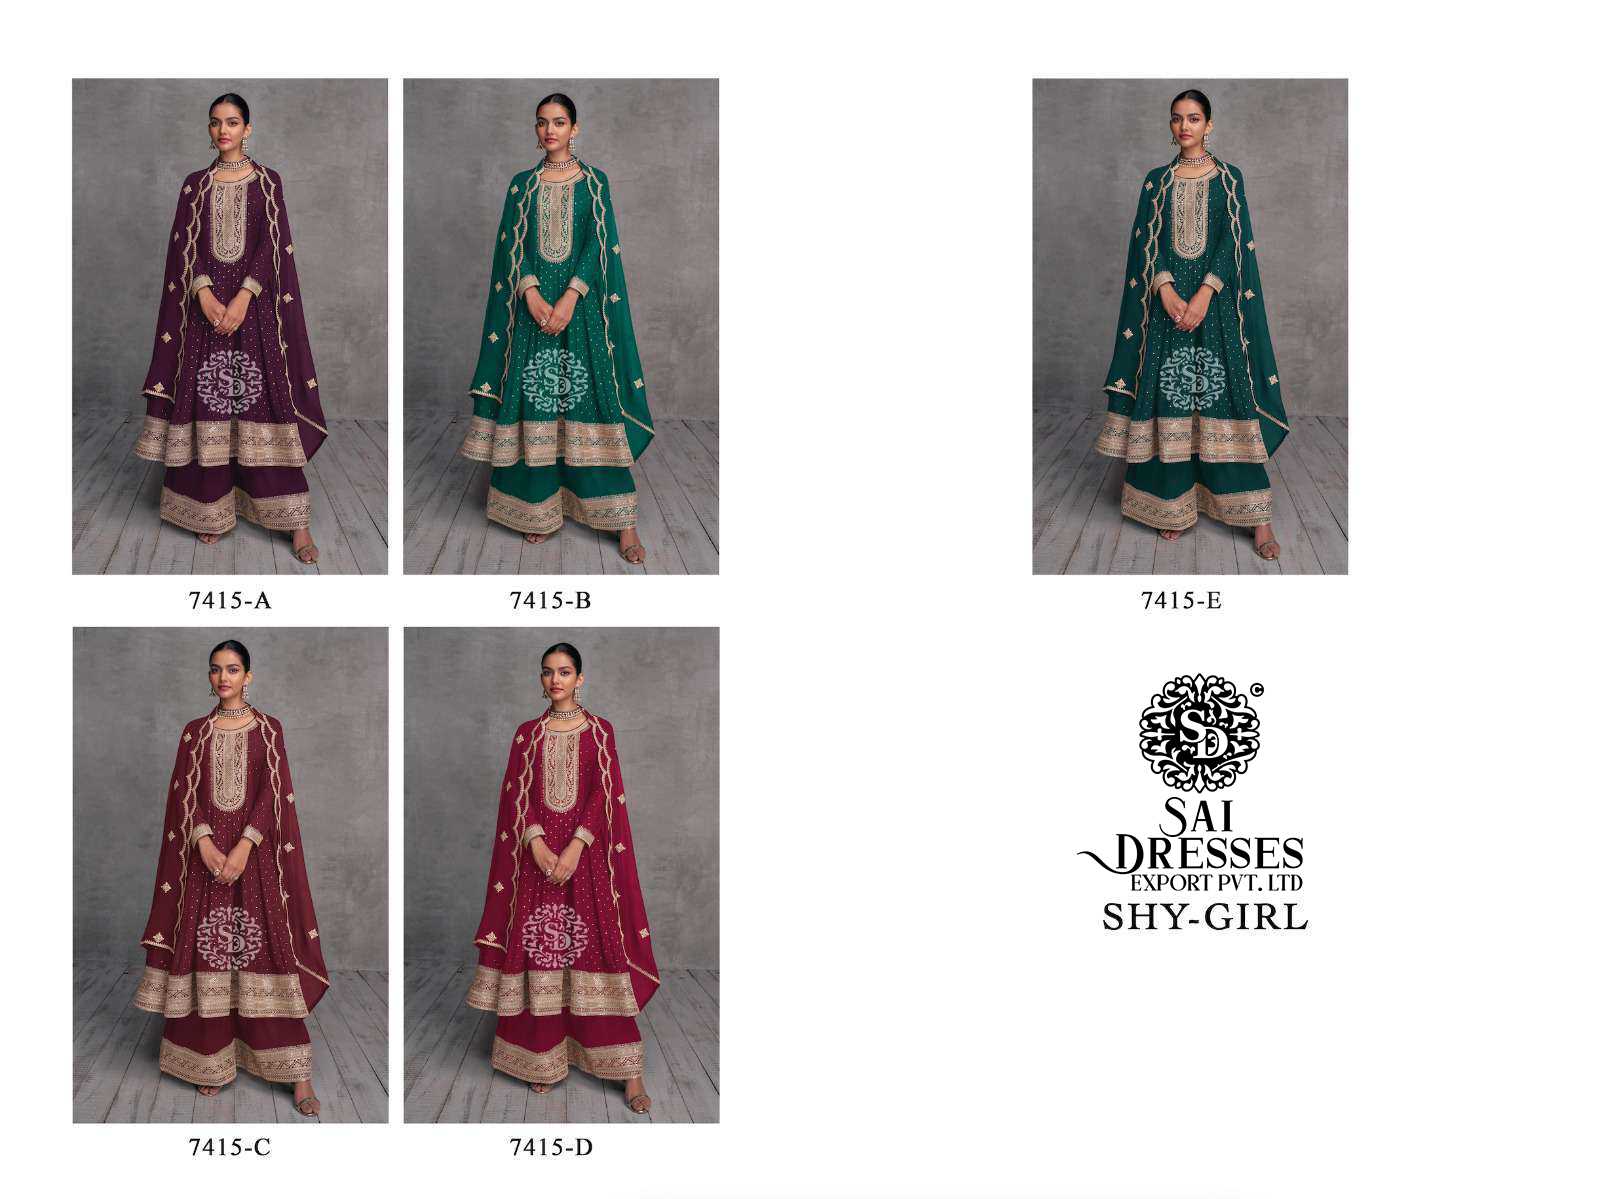 SAI DRESSES PRESENT SHYGIRL READYMADE WEDDING WEAR PLAZZO STYLE HEAVY DESIGNER 3 PIECE COLLECTION IN WHOLESALE RATE IN SURAT